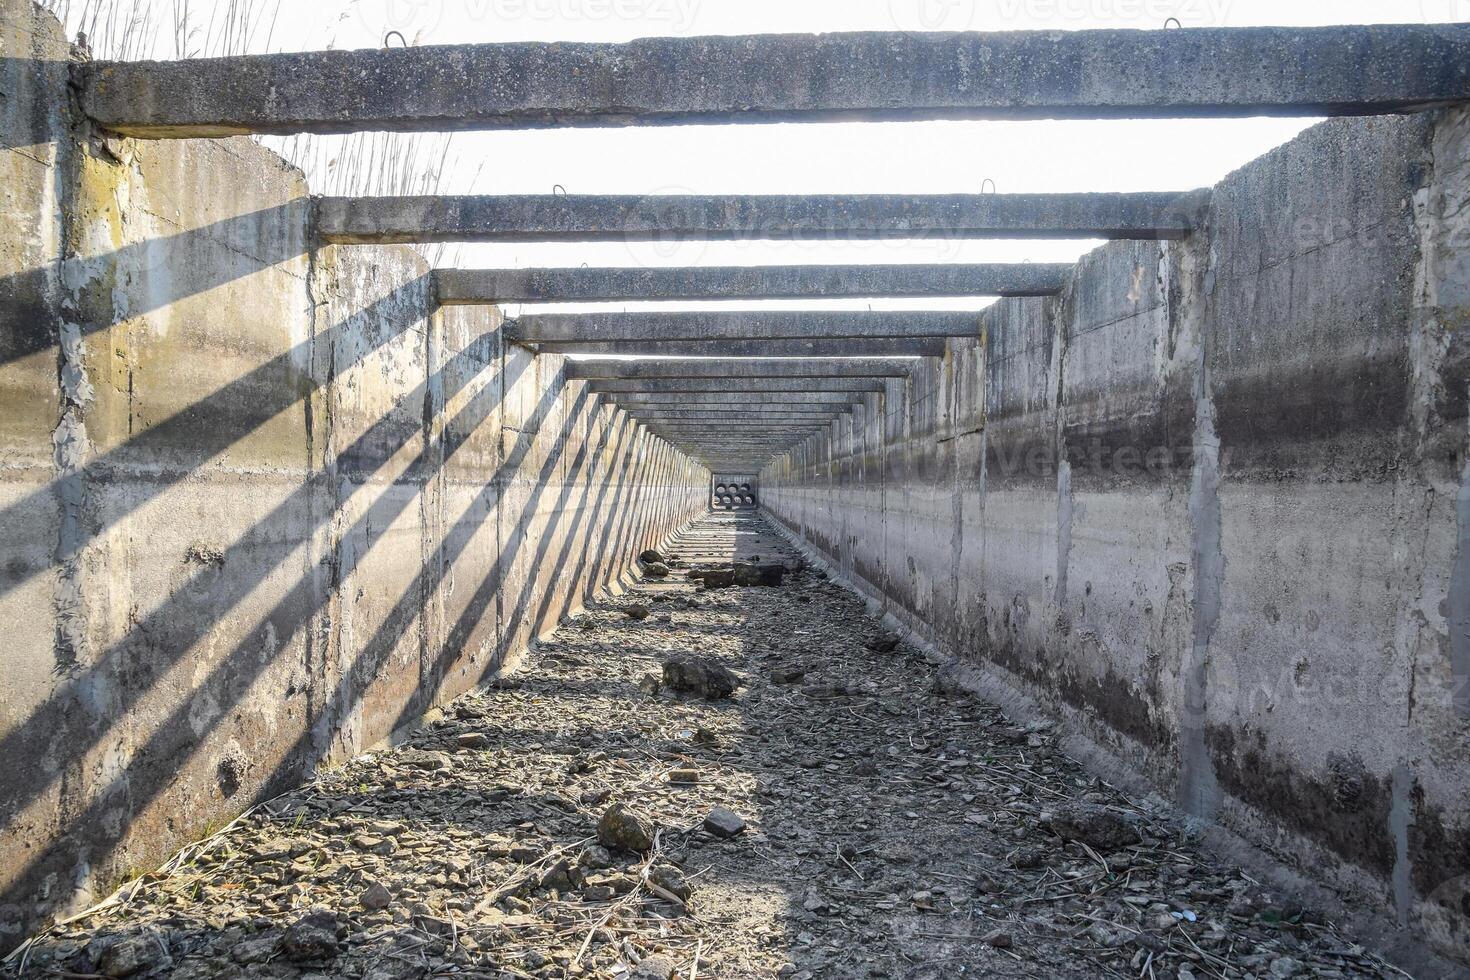 inside view of the irrigation artificial concrete channel. photo